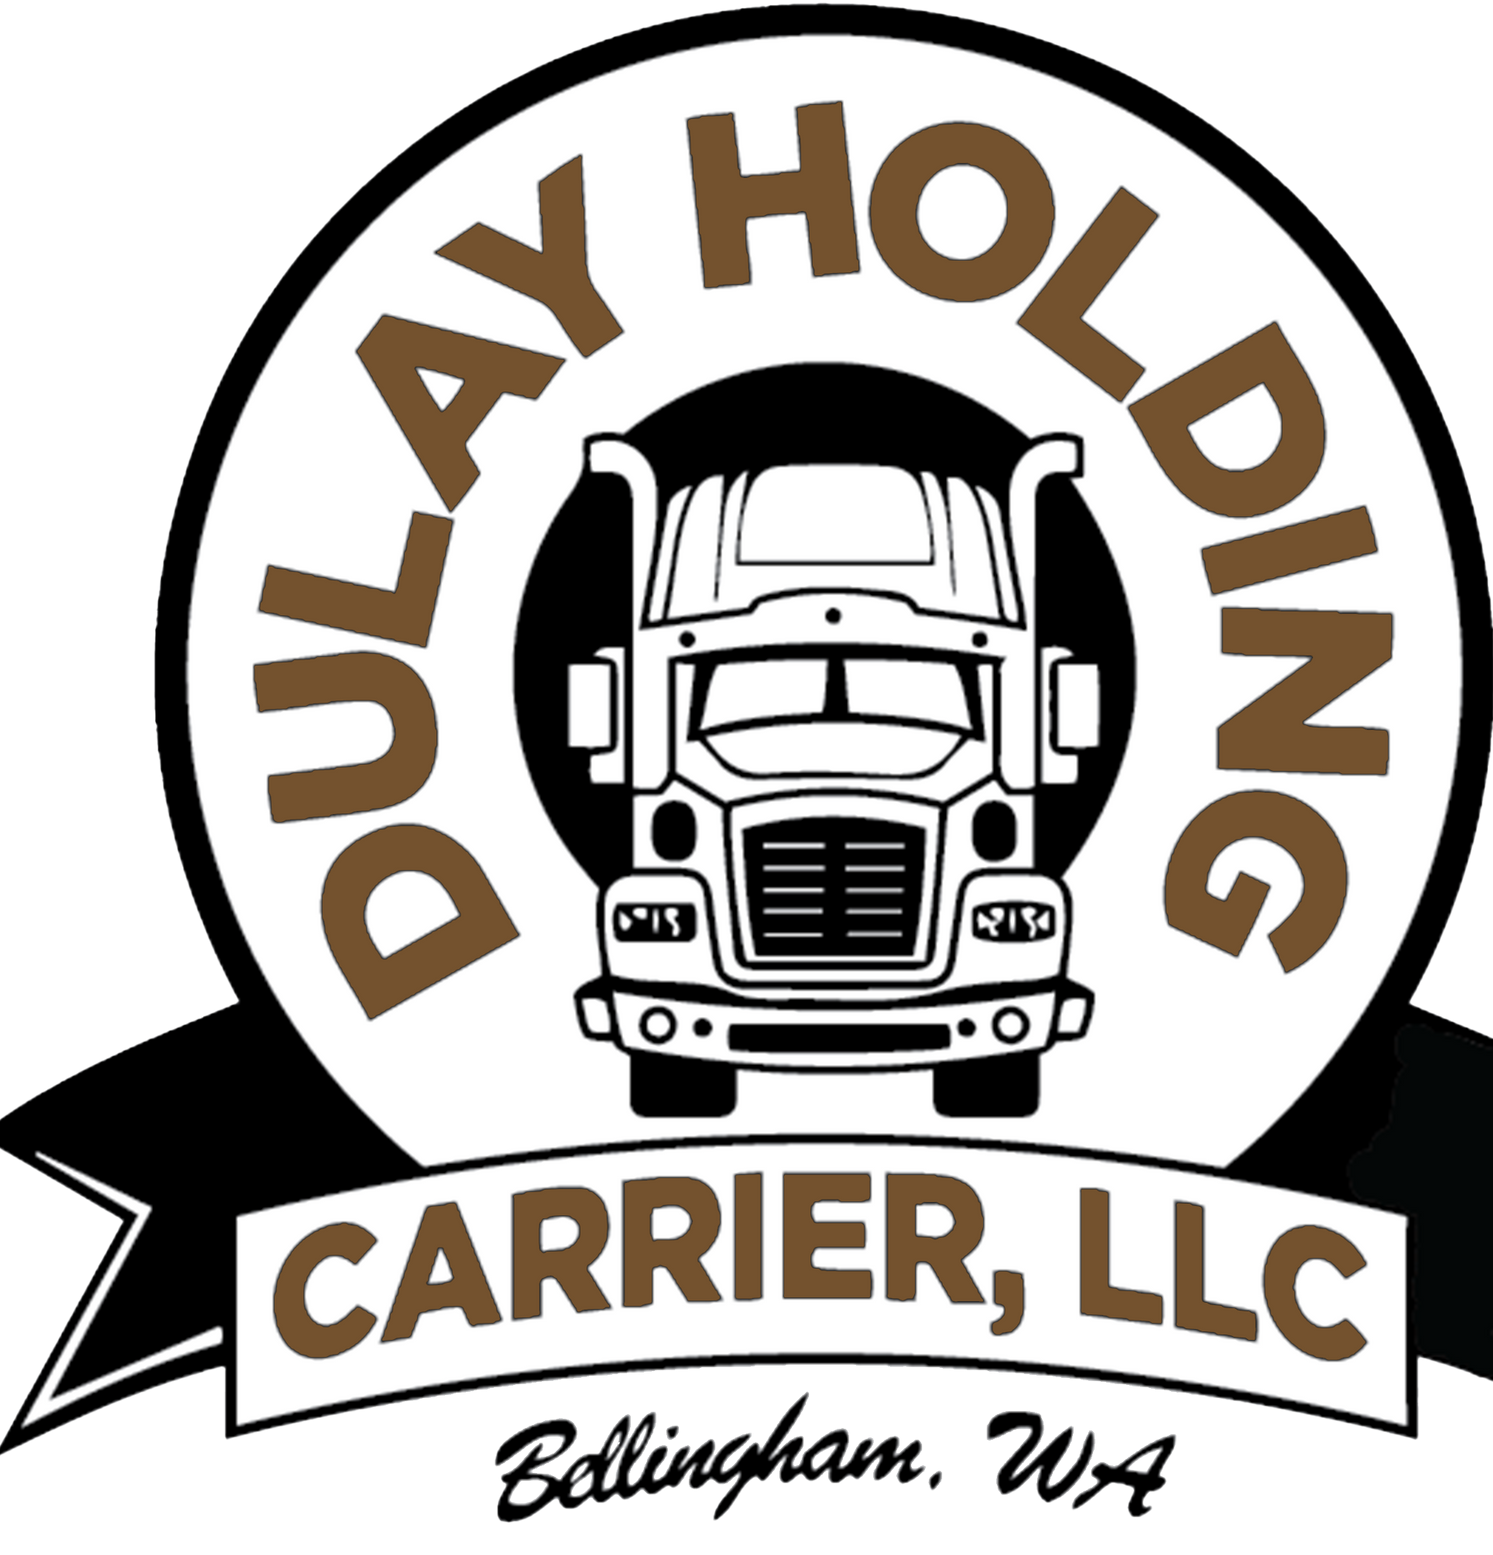 Dulay holding carrier, llc